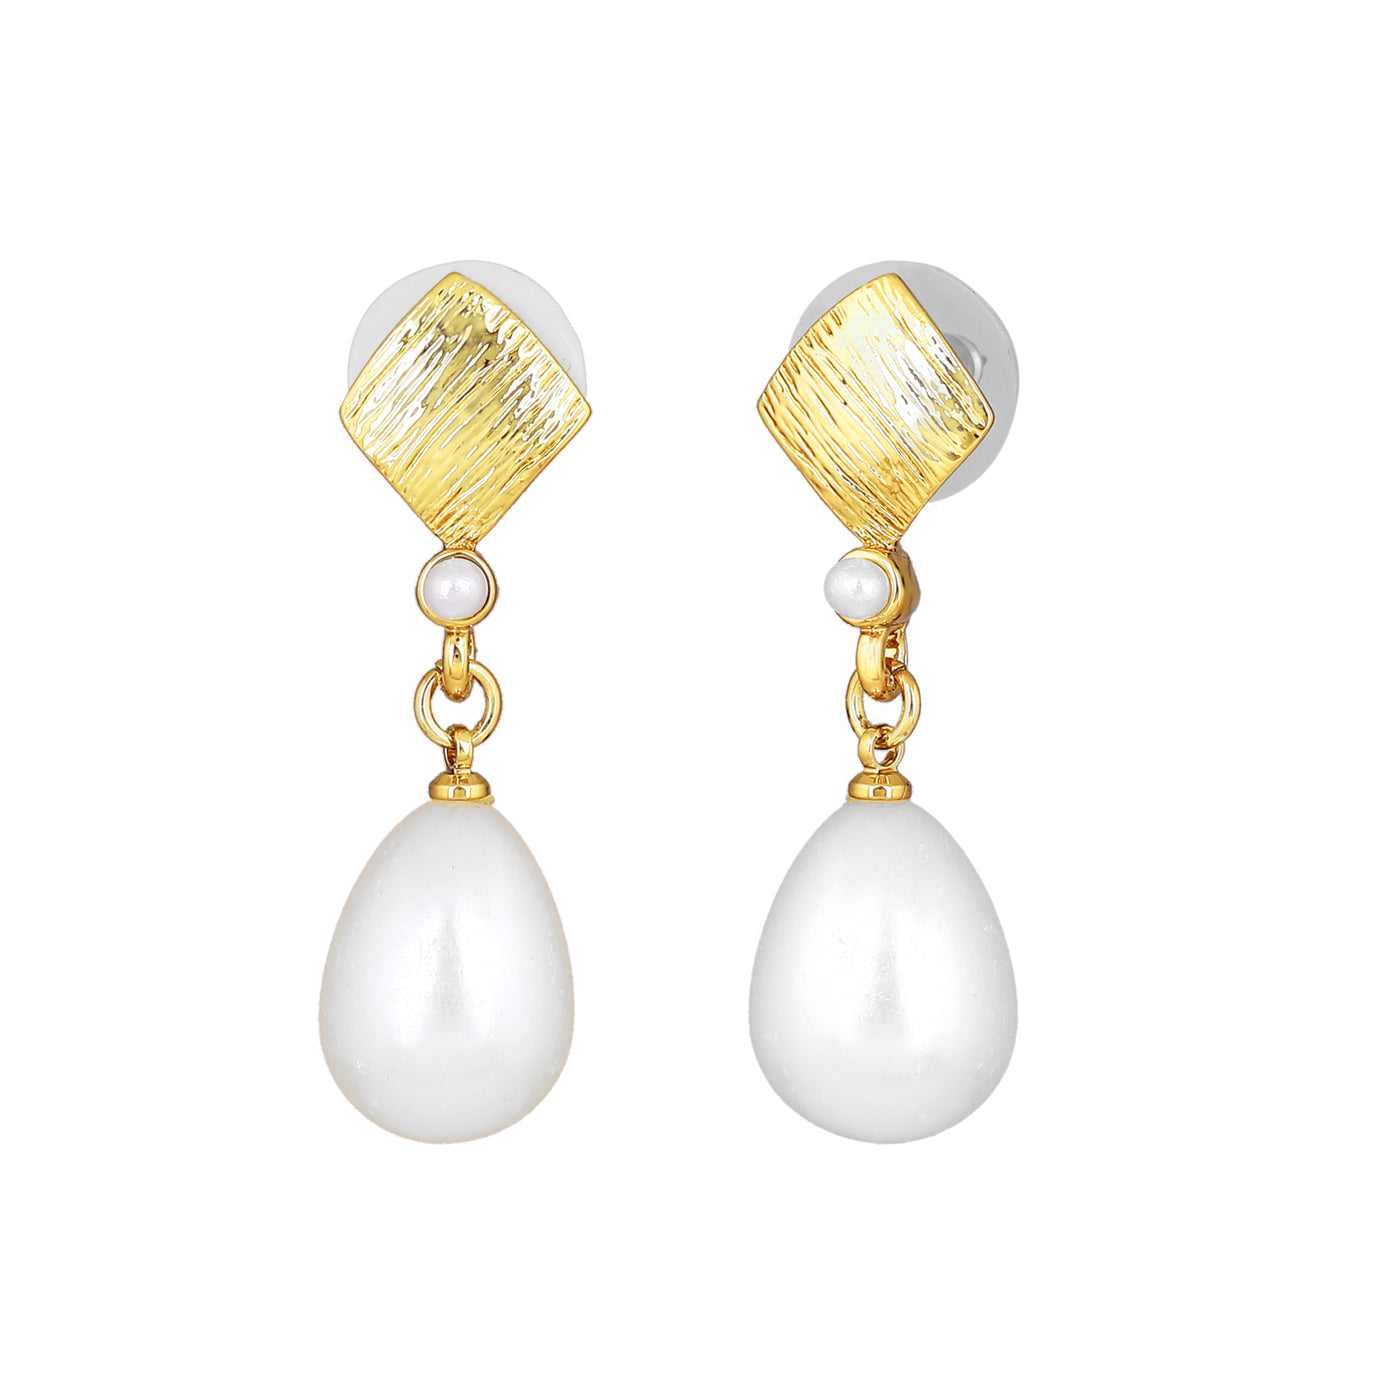 Estele Gold Plated Textured Pearl Drop Earrings for Girls and Women